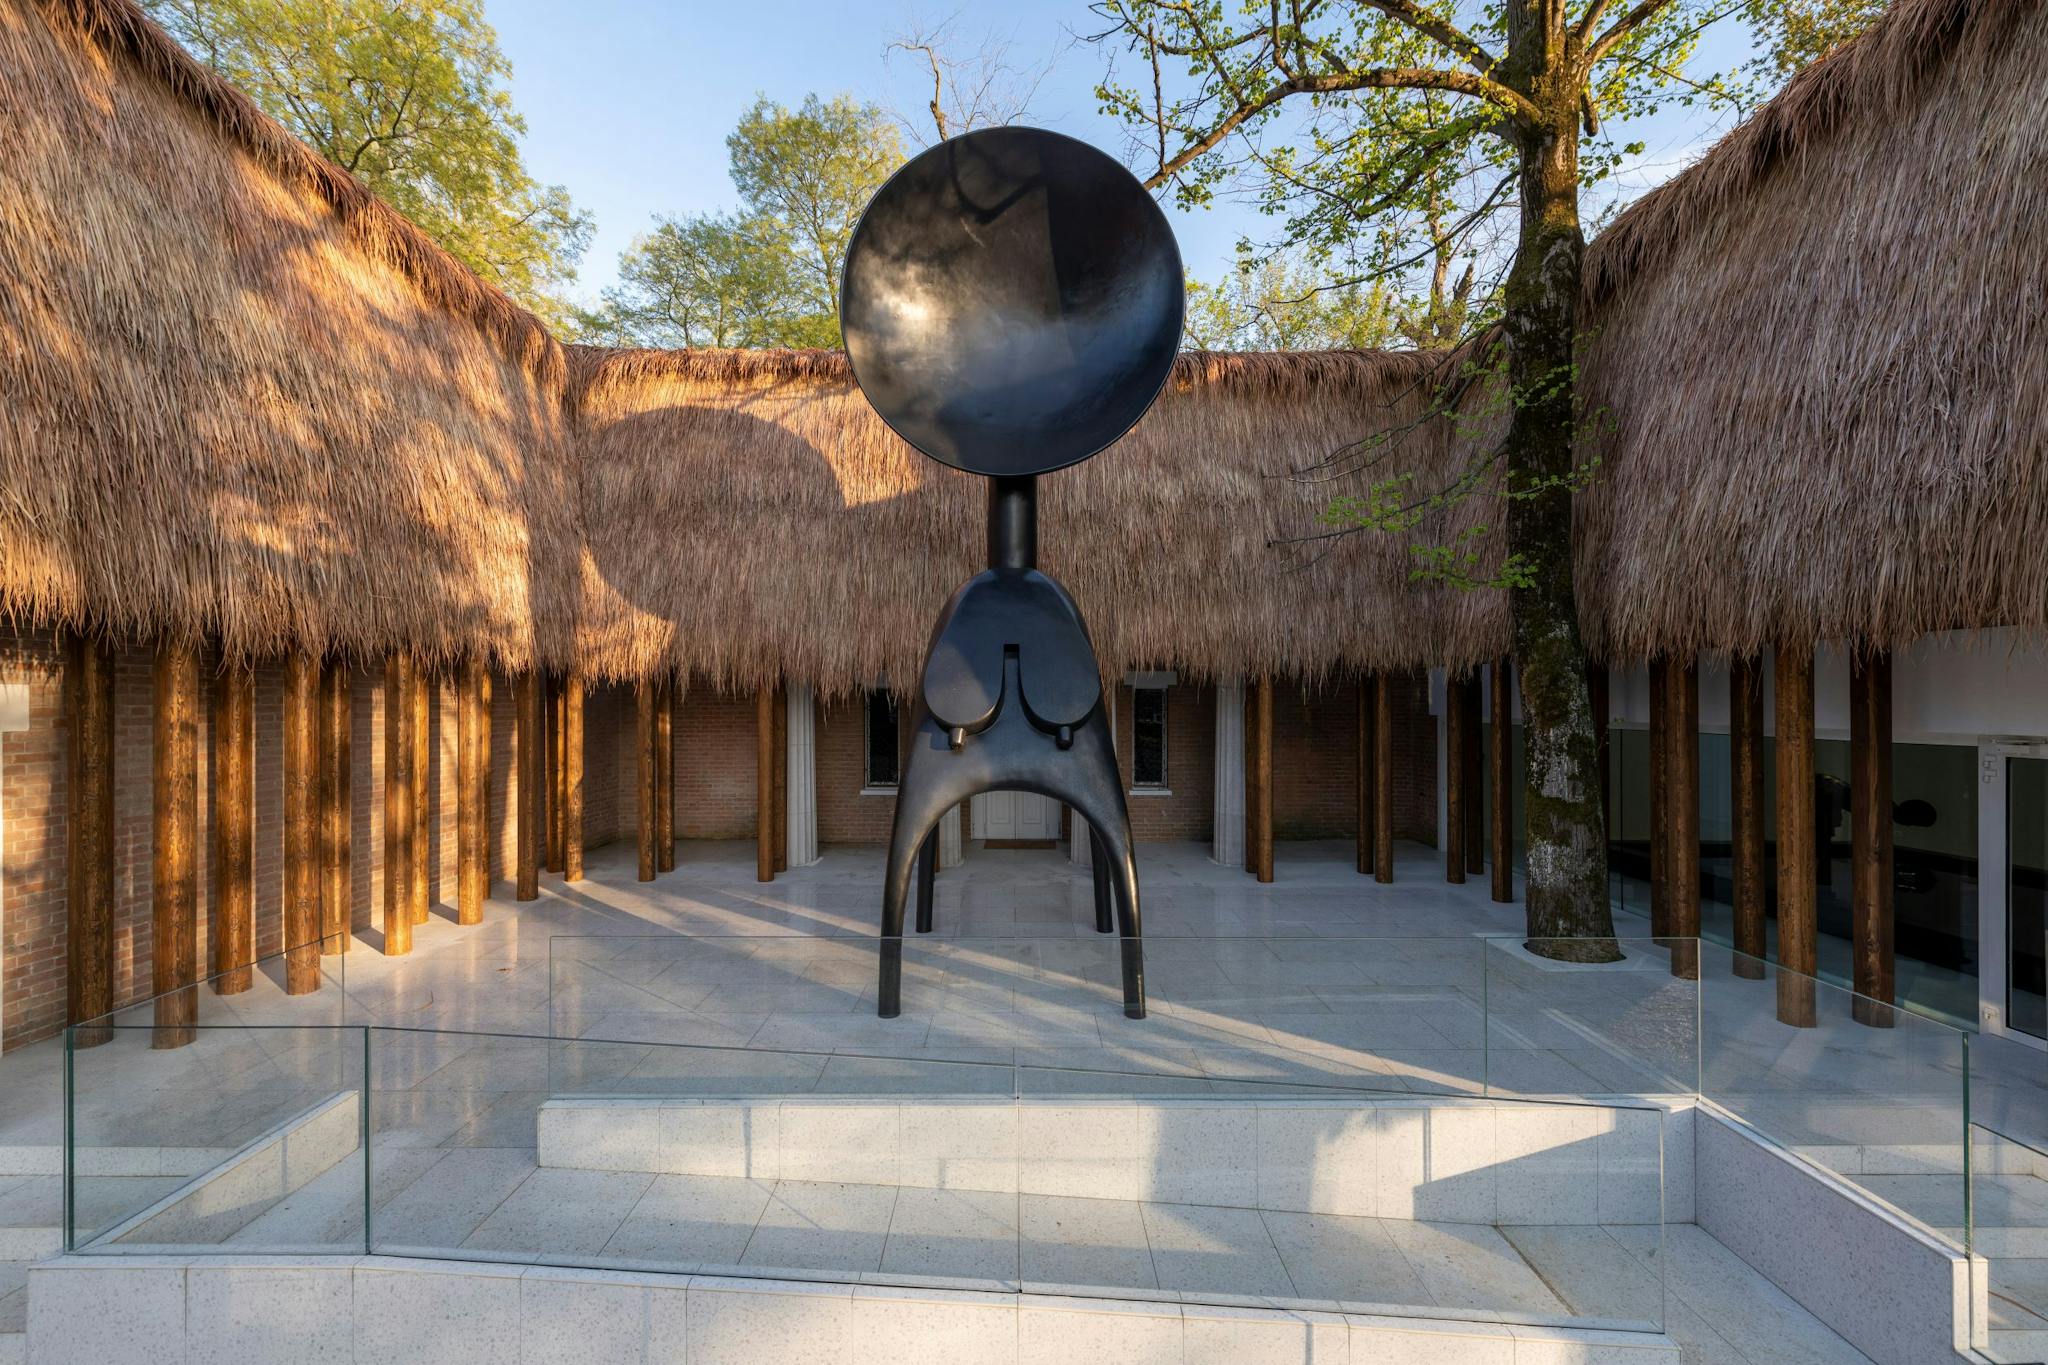 A work of art made from thatch, steel, and wood, designed by Simone Leigh.